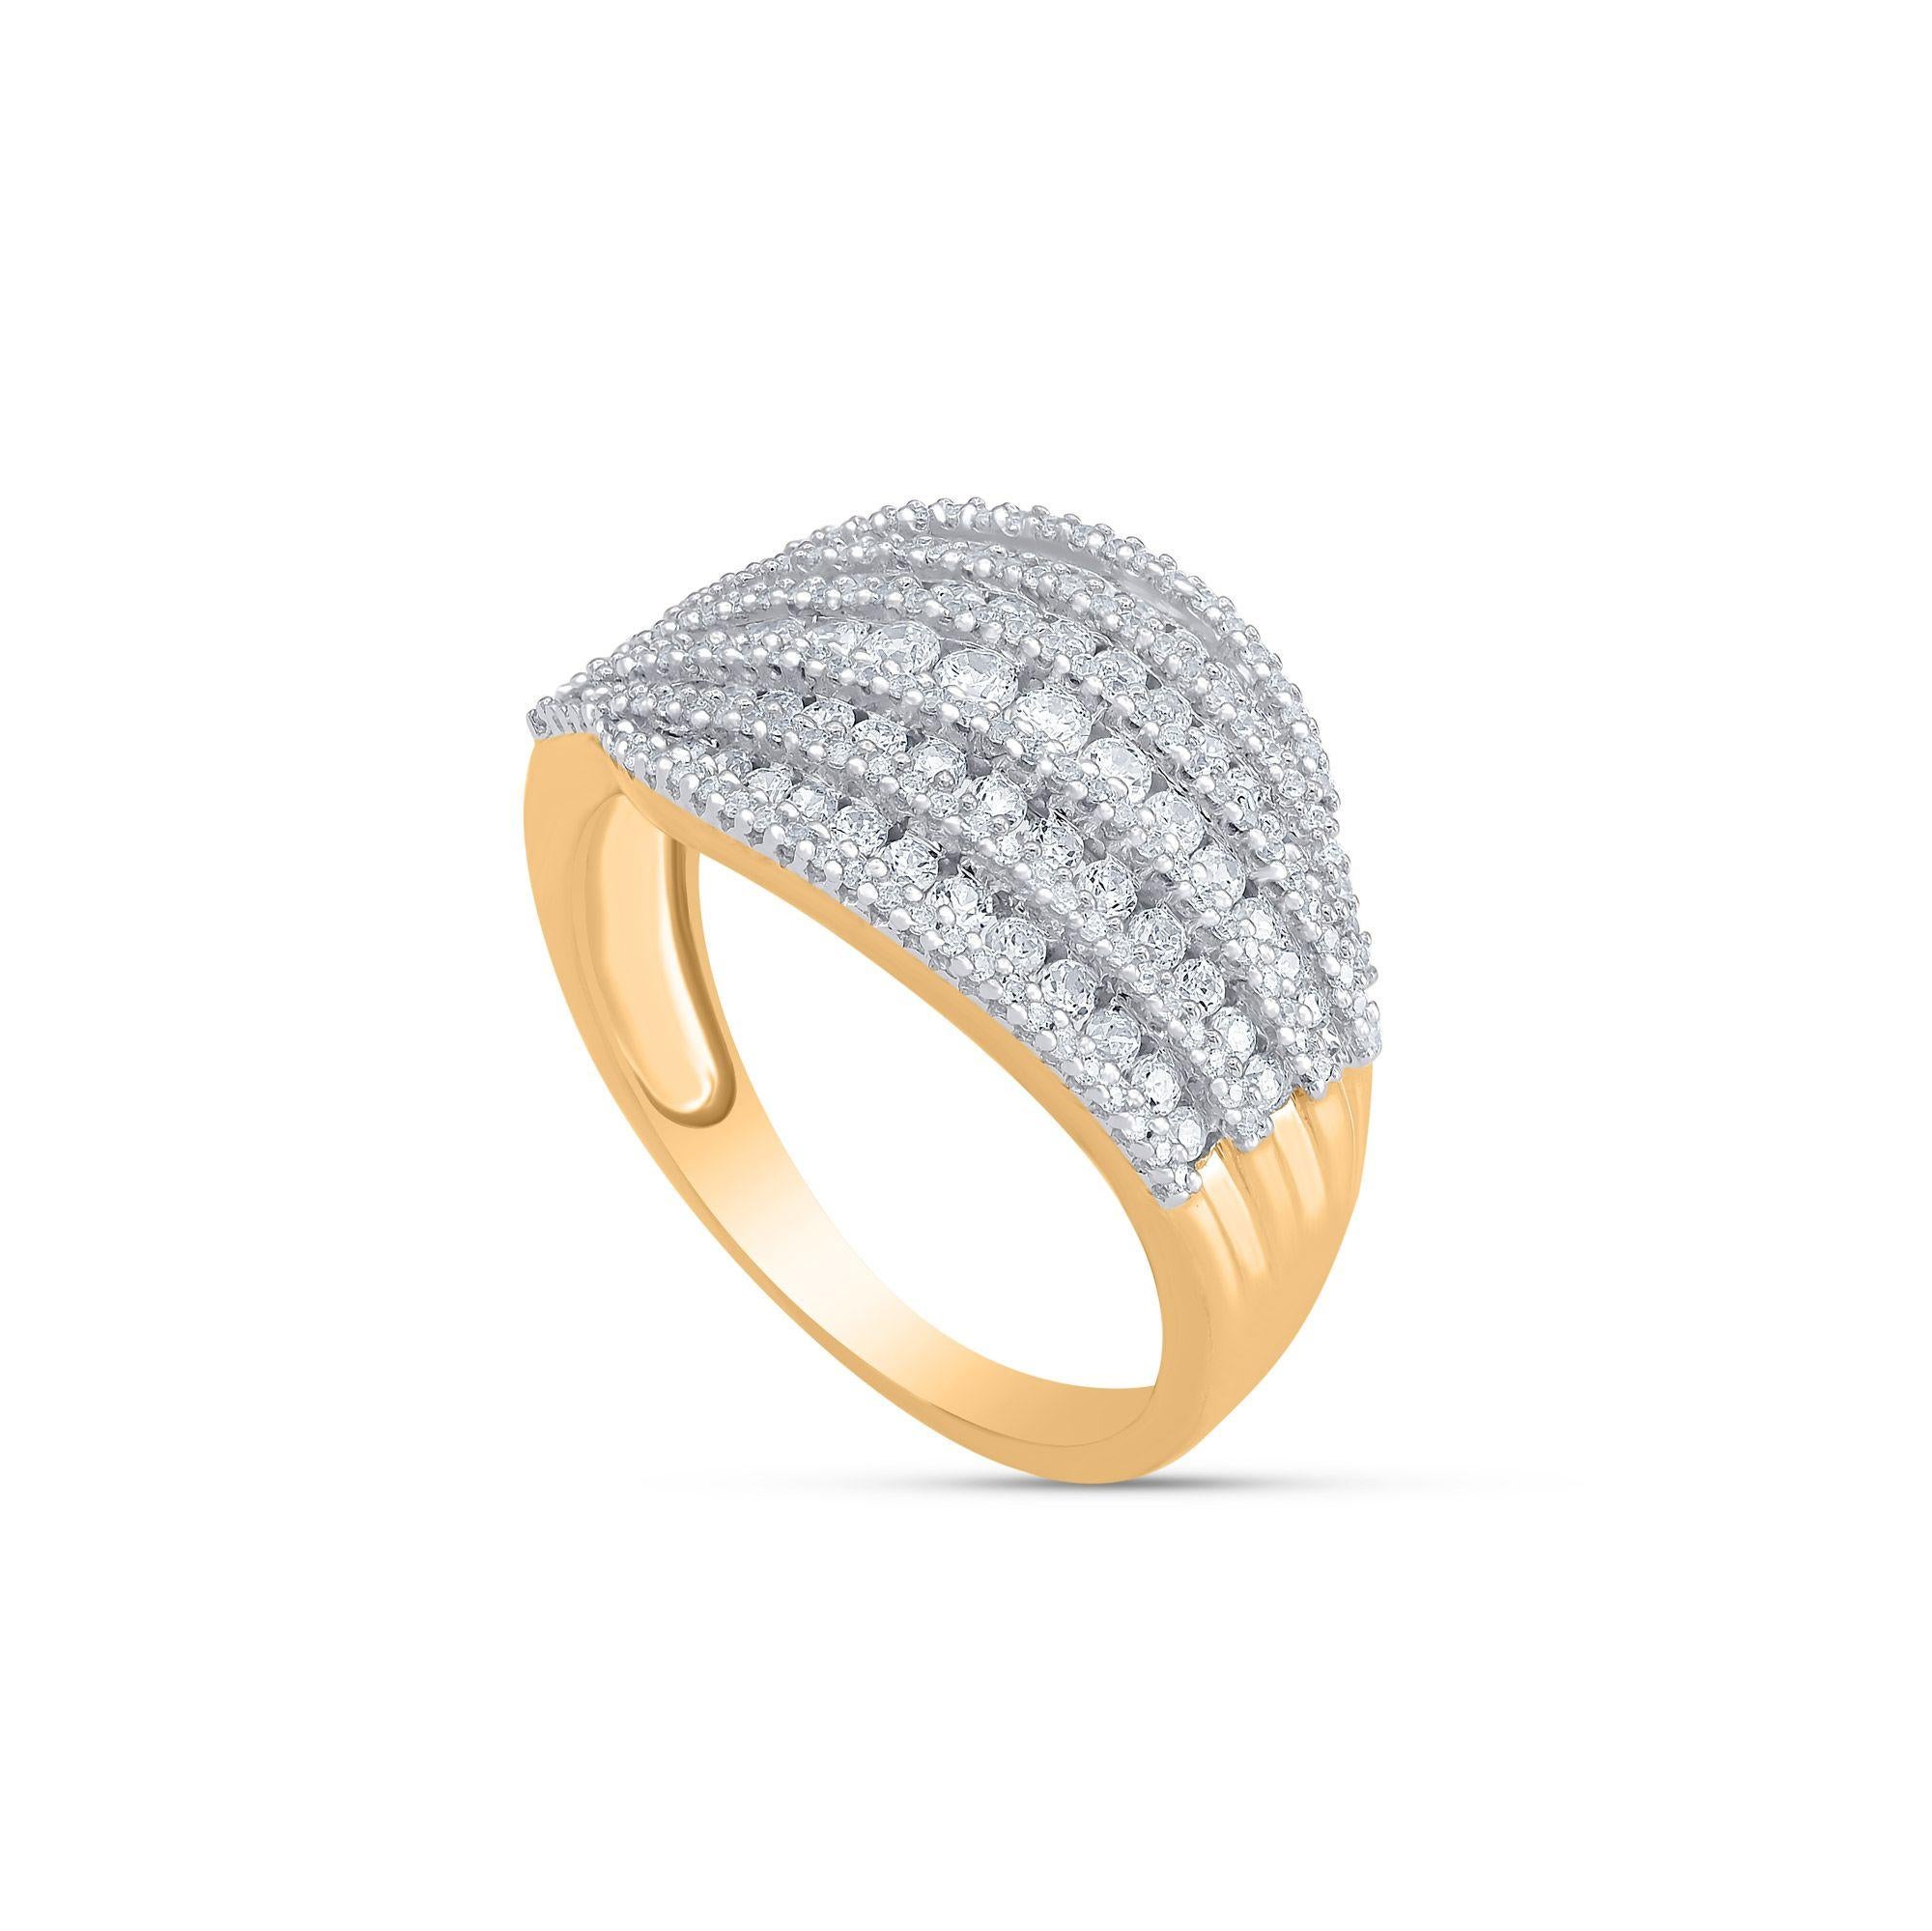 A fusion of diamonds and gold, made in 10 kt yellow gold.  A multi-row design accentuated with 233 round-cut diamonds set in prong and channel setting. The diamonds are graded I-J Color, I1-I2 Clarity.
